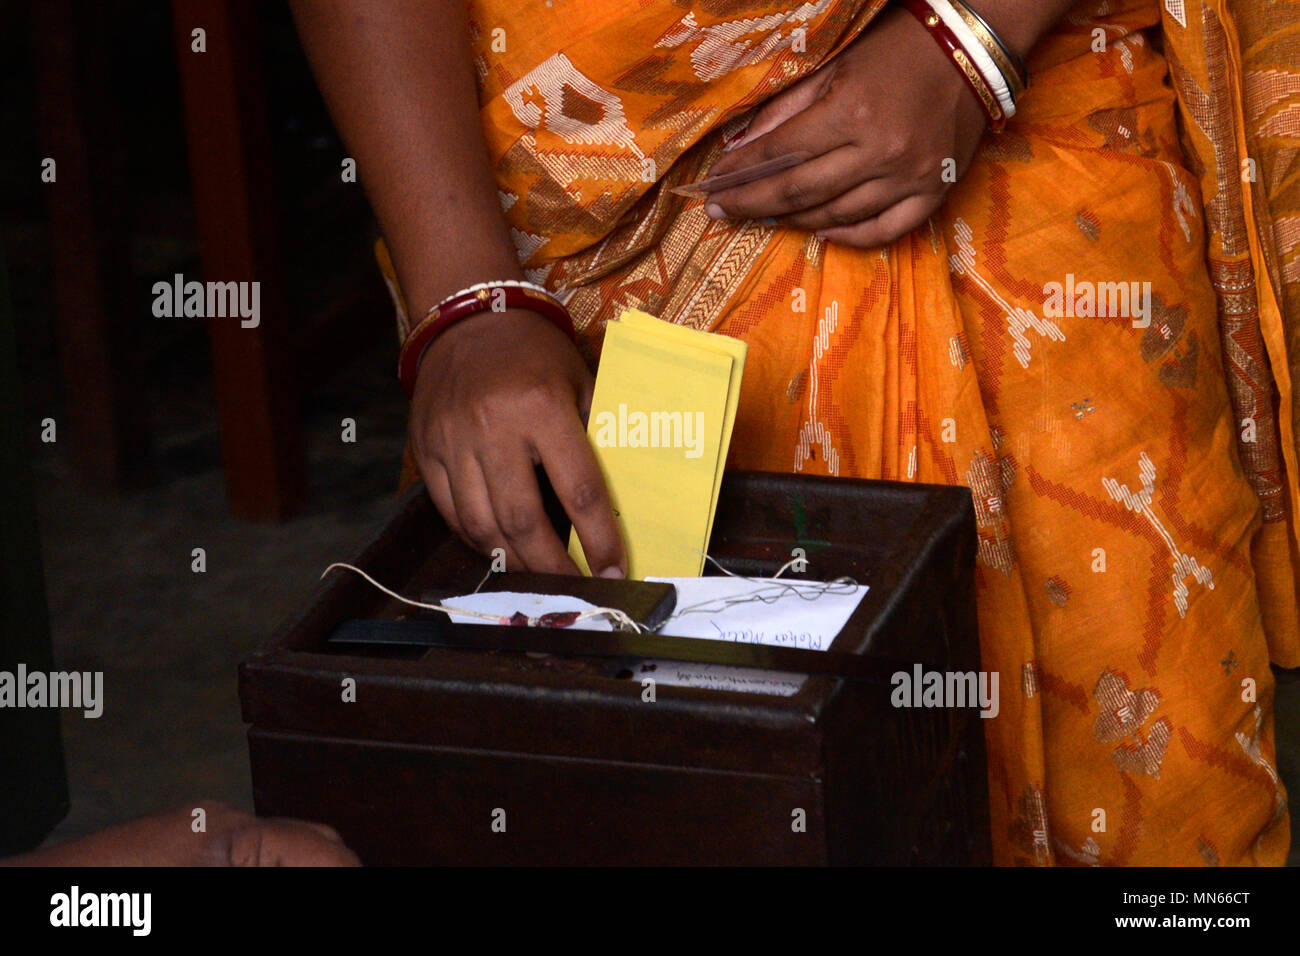 Kolkata, India. 14th May, 2018. Indian woman cast her vote at polling station of Singur area of Hooghly district during the West Bengal Three Tier Panchayat Election 2018. Single phase Three Tier Panchayat Election 2018 held at the district of West Bengal, over all 72.5% polls recorded till the end. Credit: Saikat Paul/Pacific Press/Alamy Live News Stock Photo